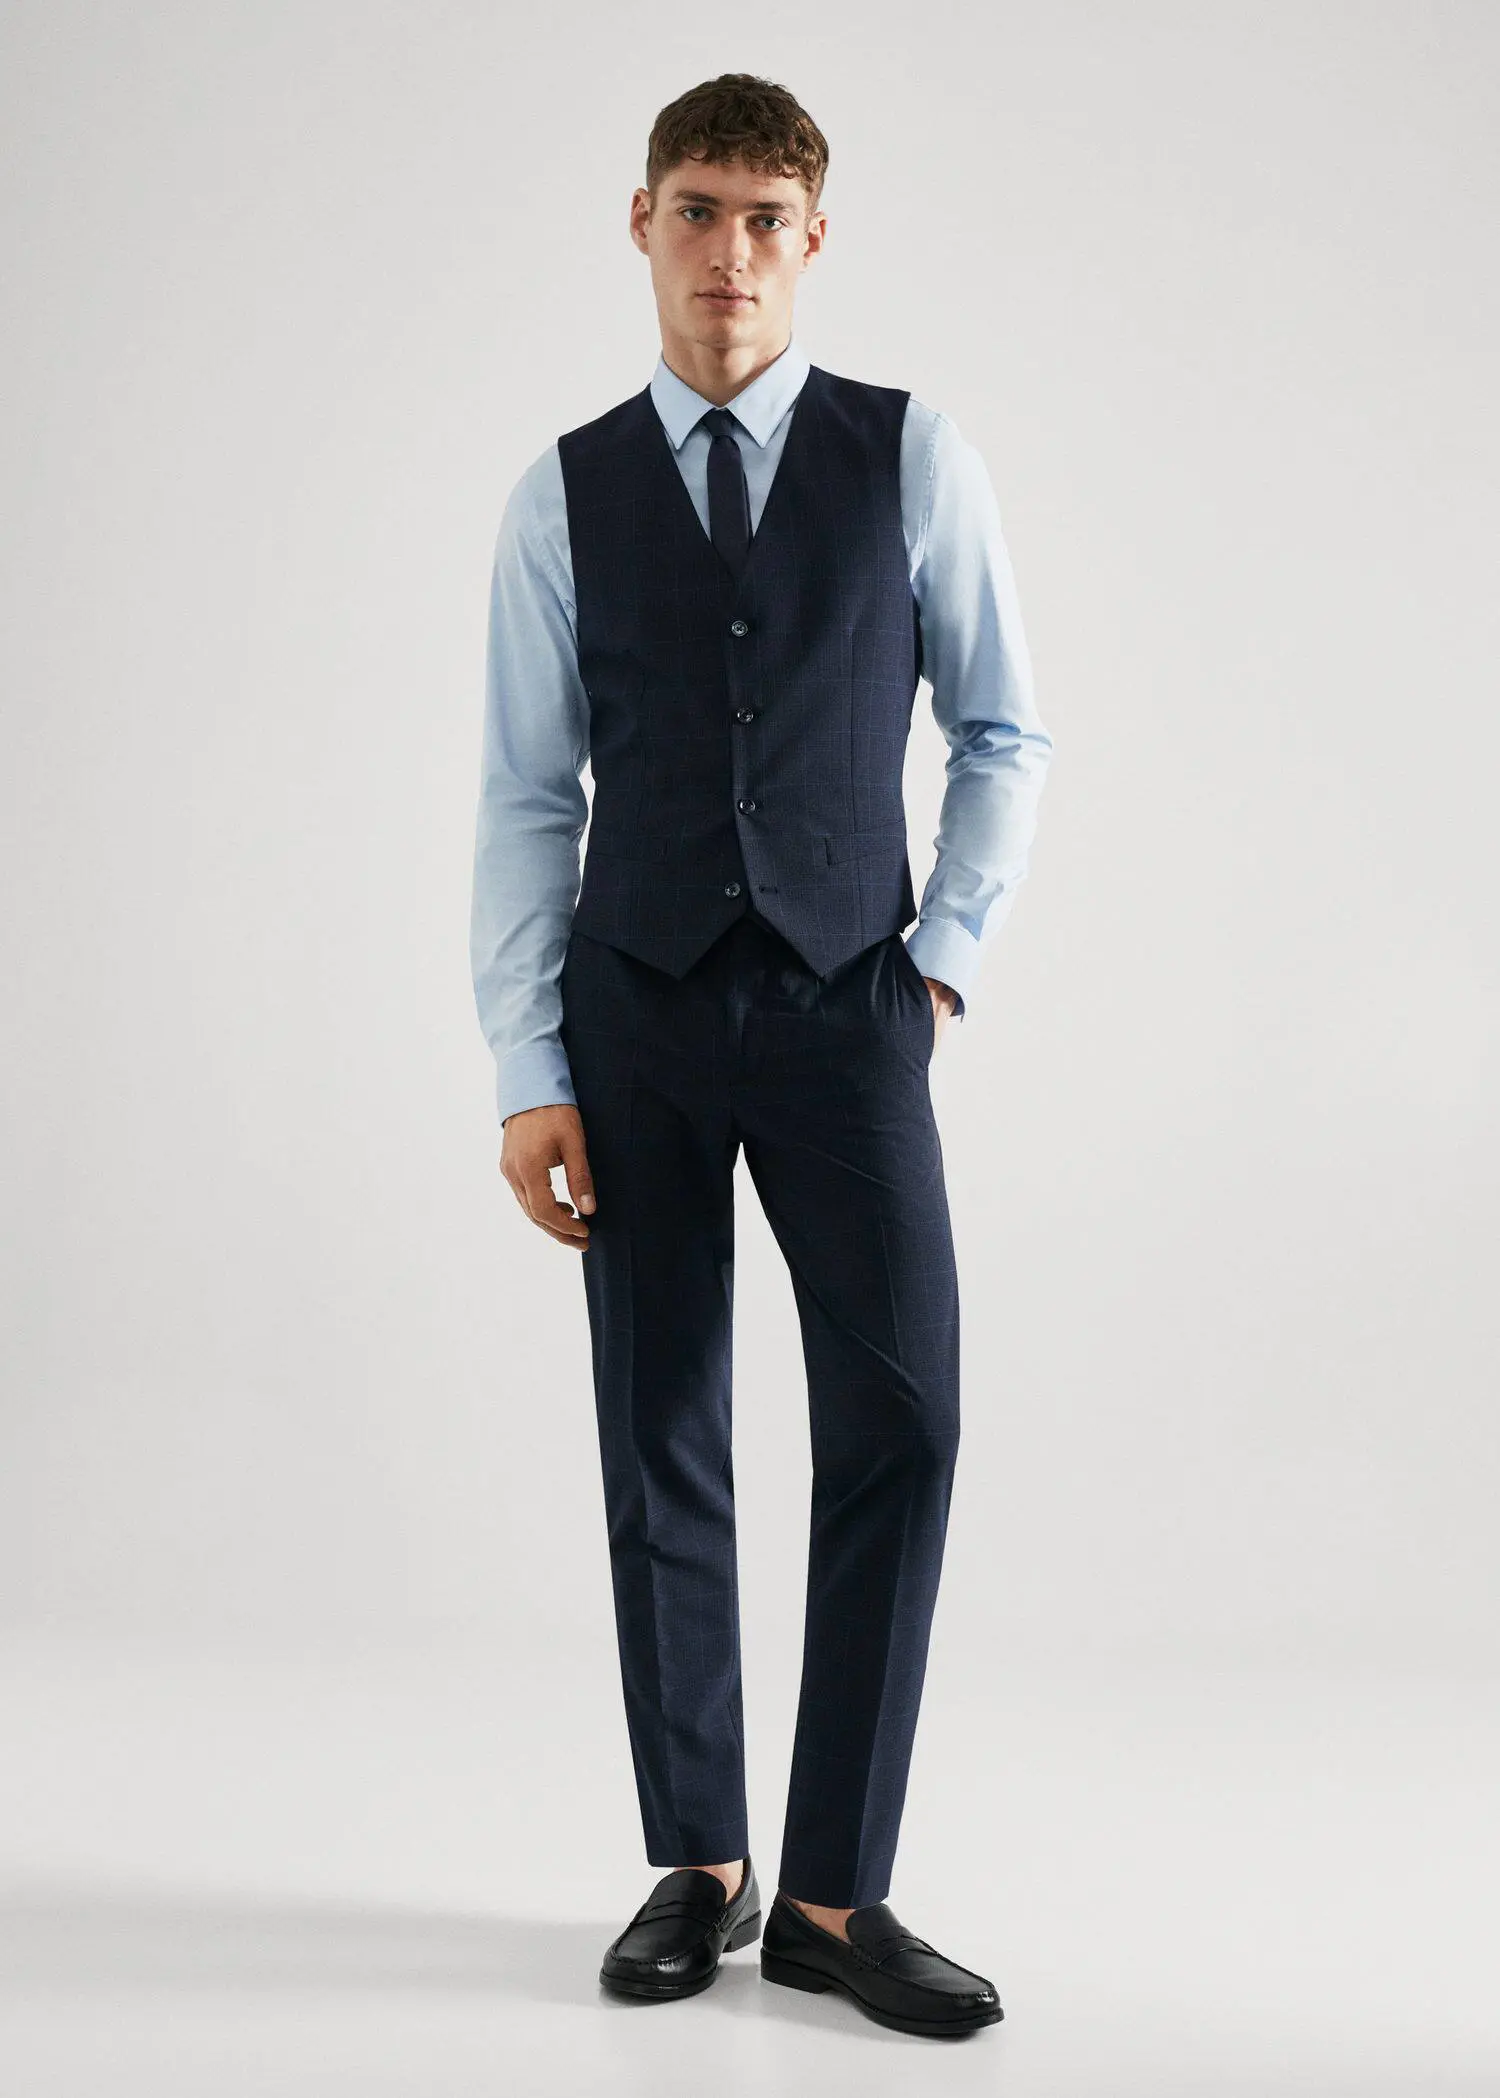 Mango Super slim-fit check suit waistcoat. a man wearing a suit and tie standing in a room. 